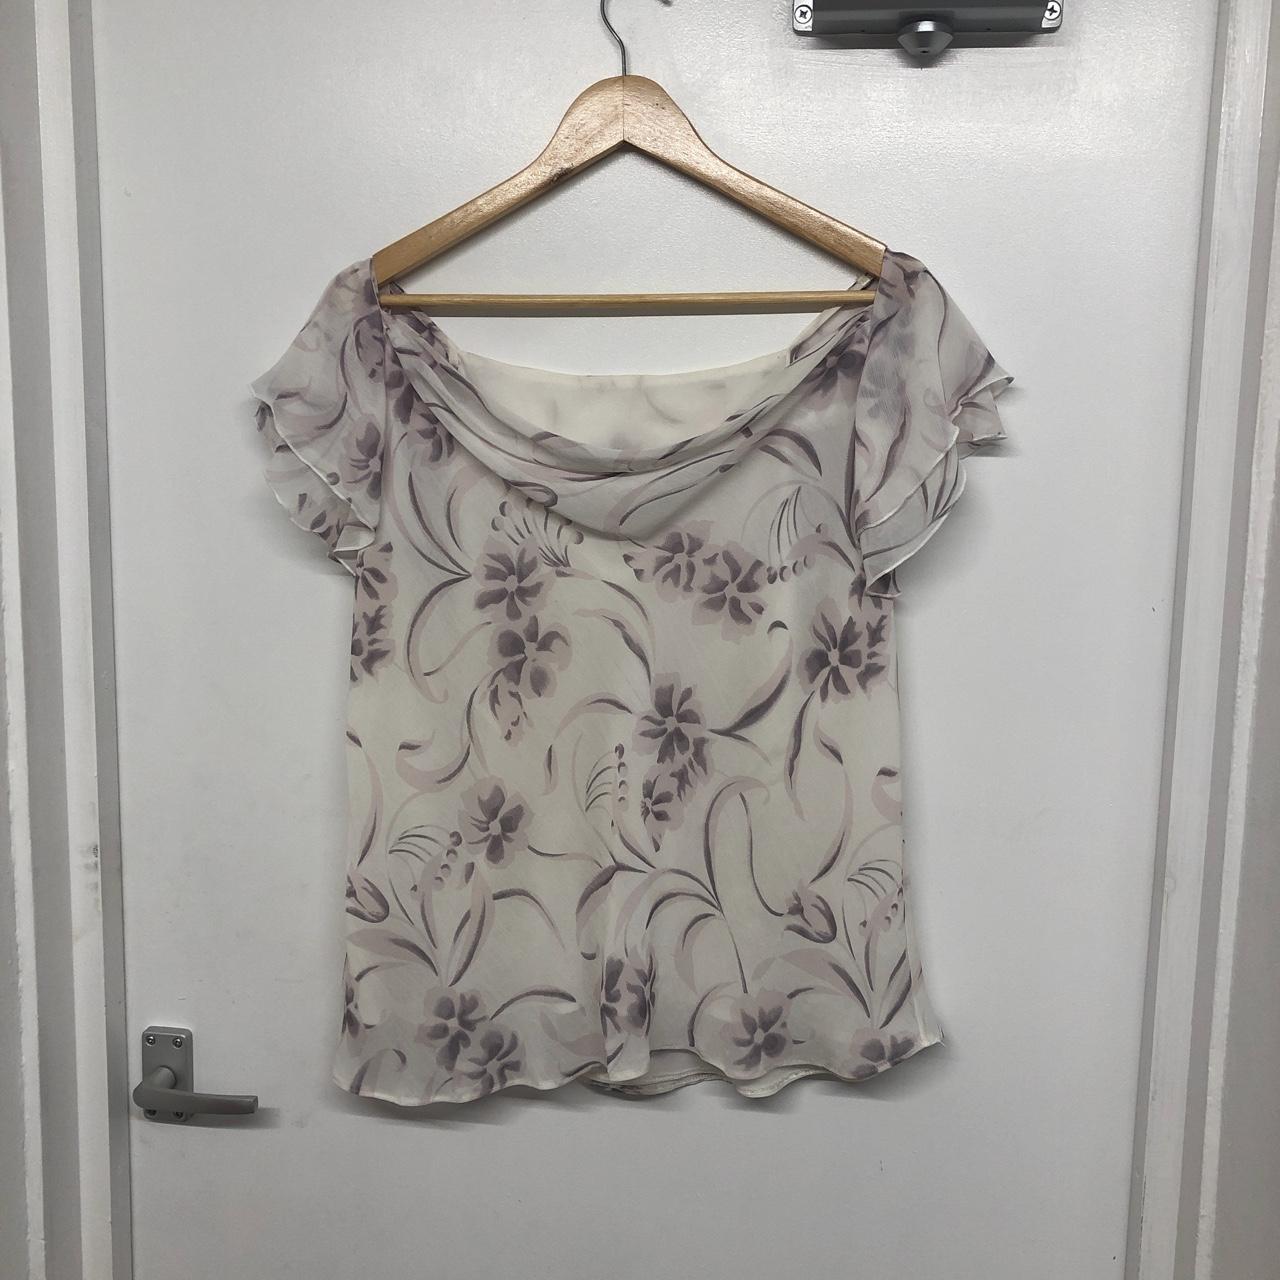 Fairycore top in white and purple floral... - Depop